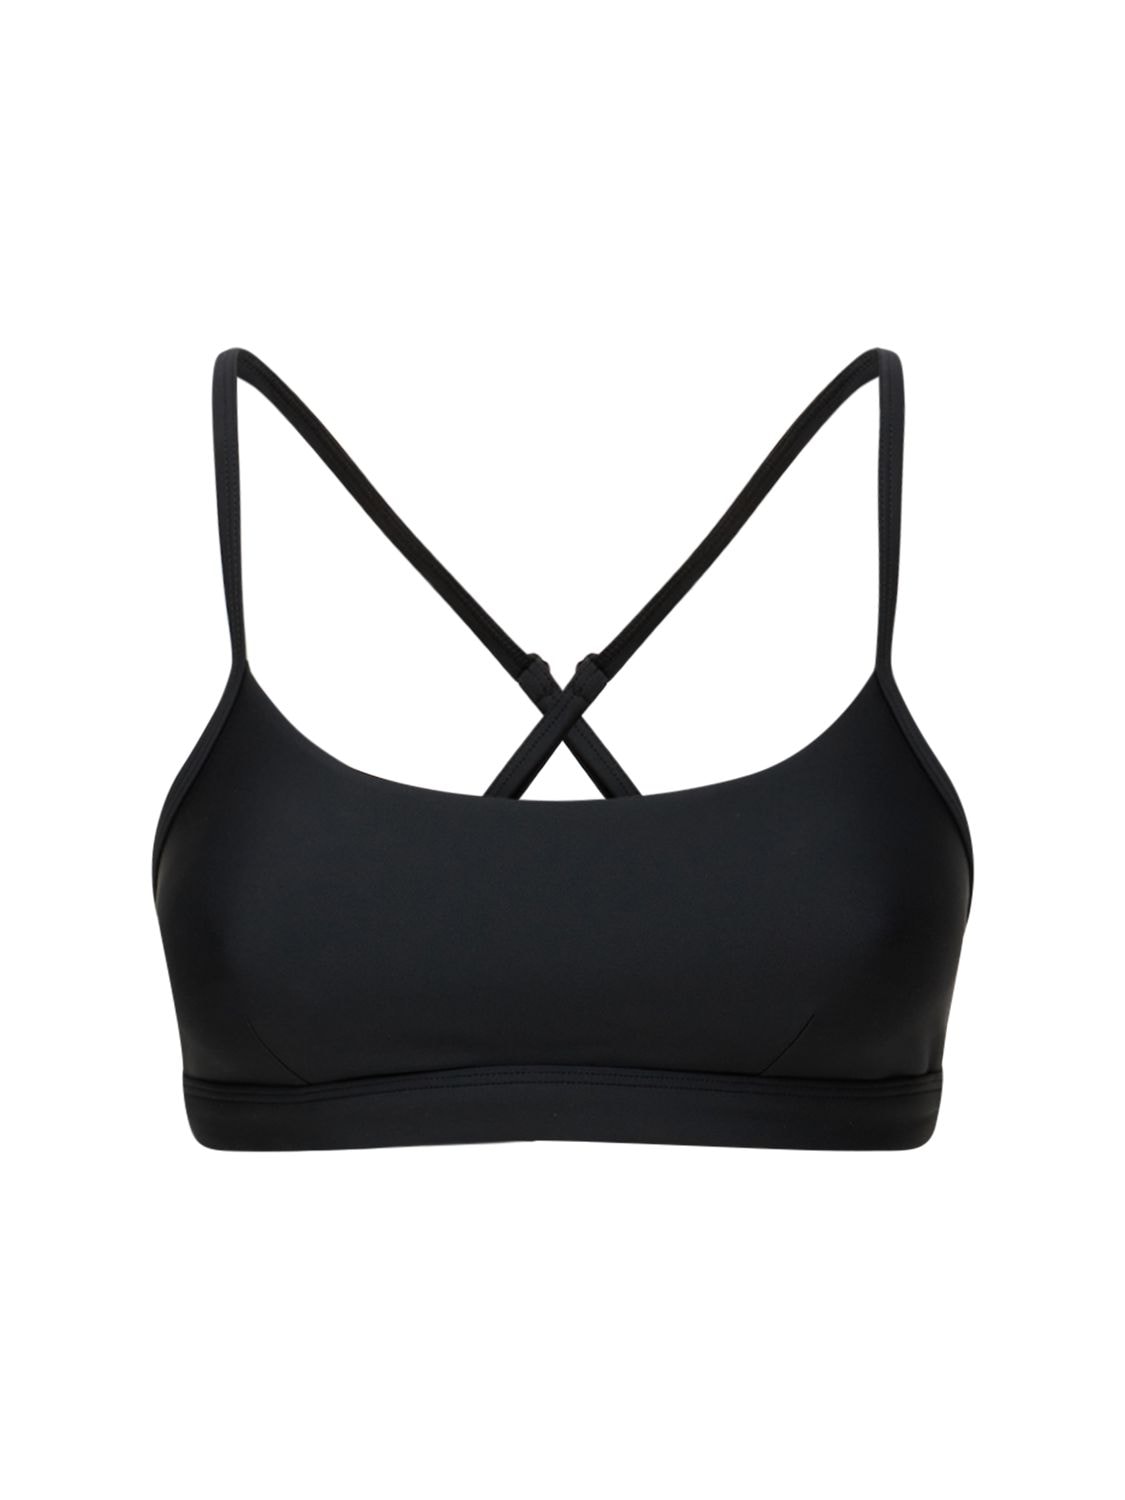 ALO YOGA AIRLIFT INTRIGUE BRA TOP,74IE7R095-QKXBQ0S1